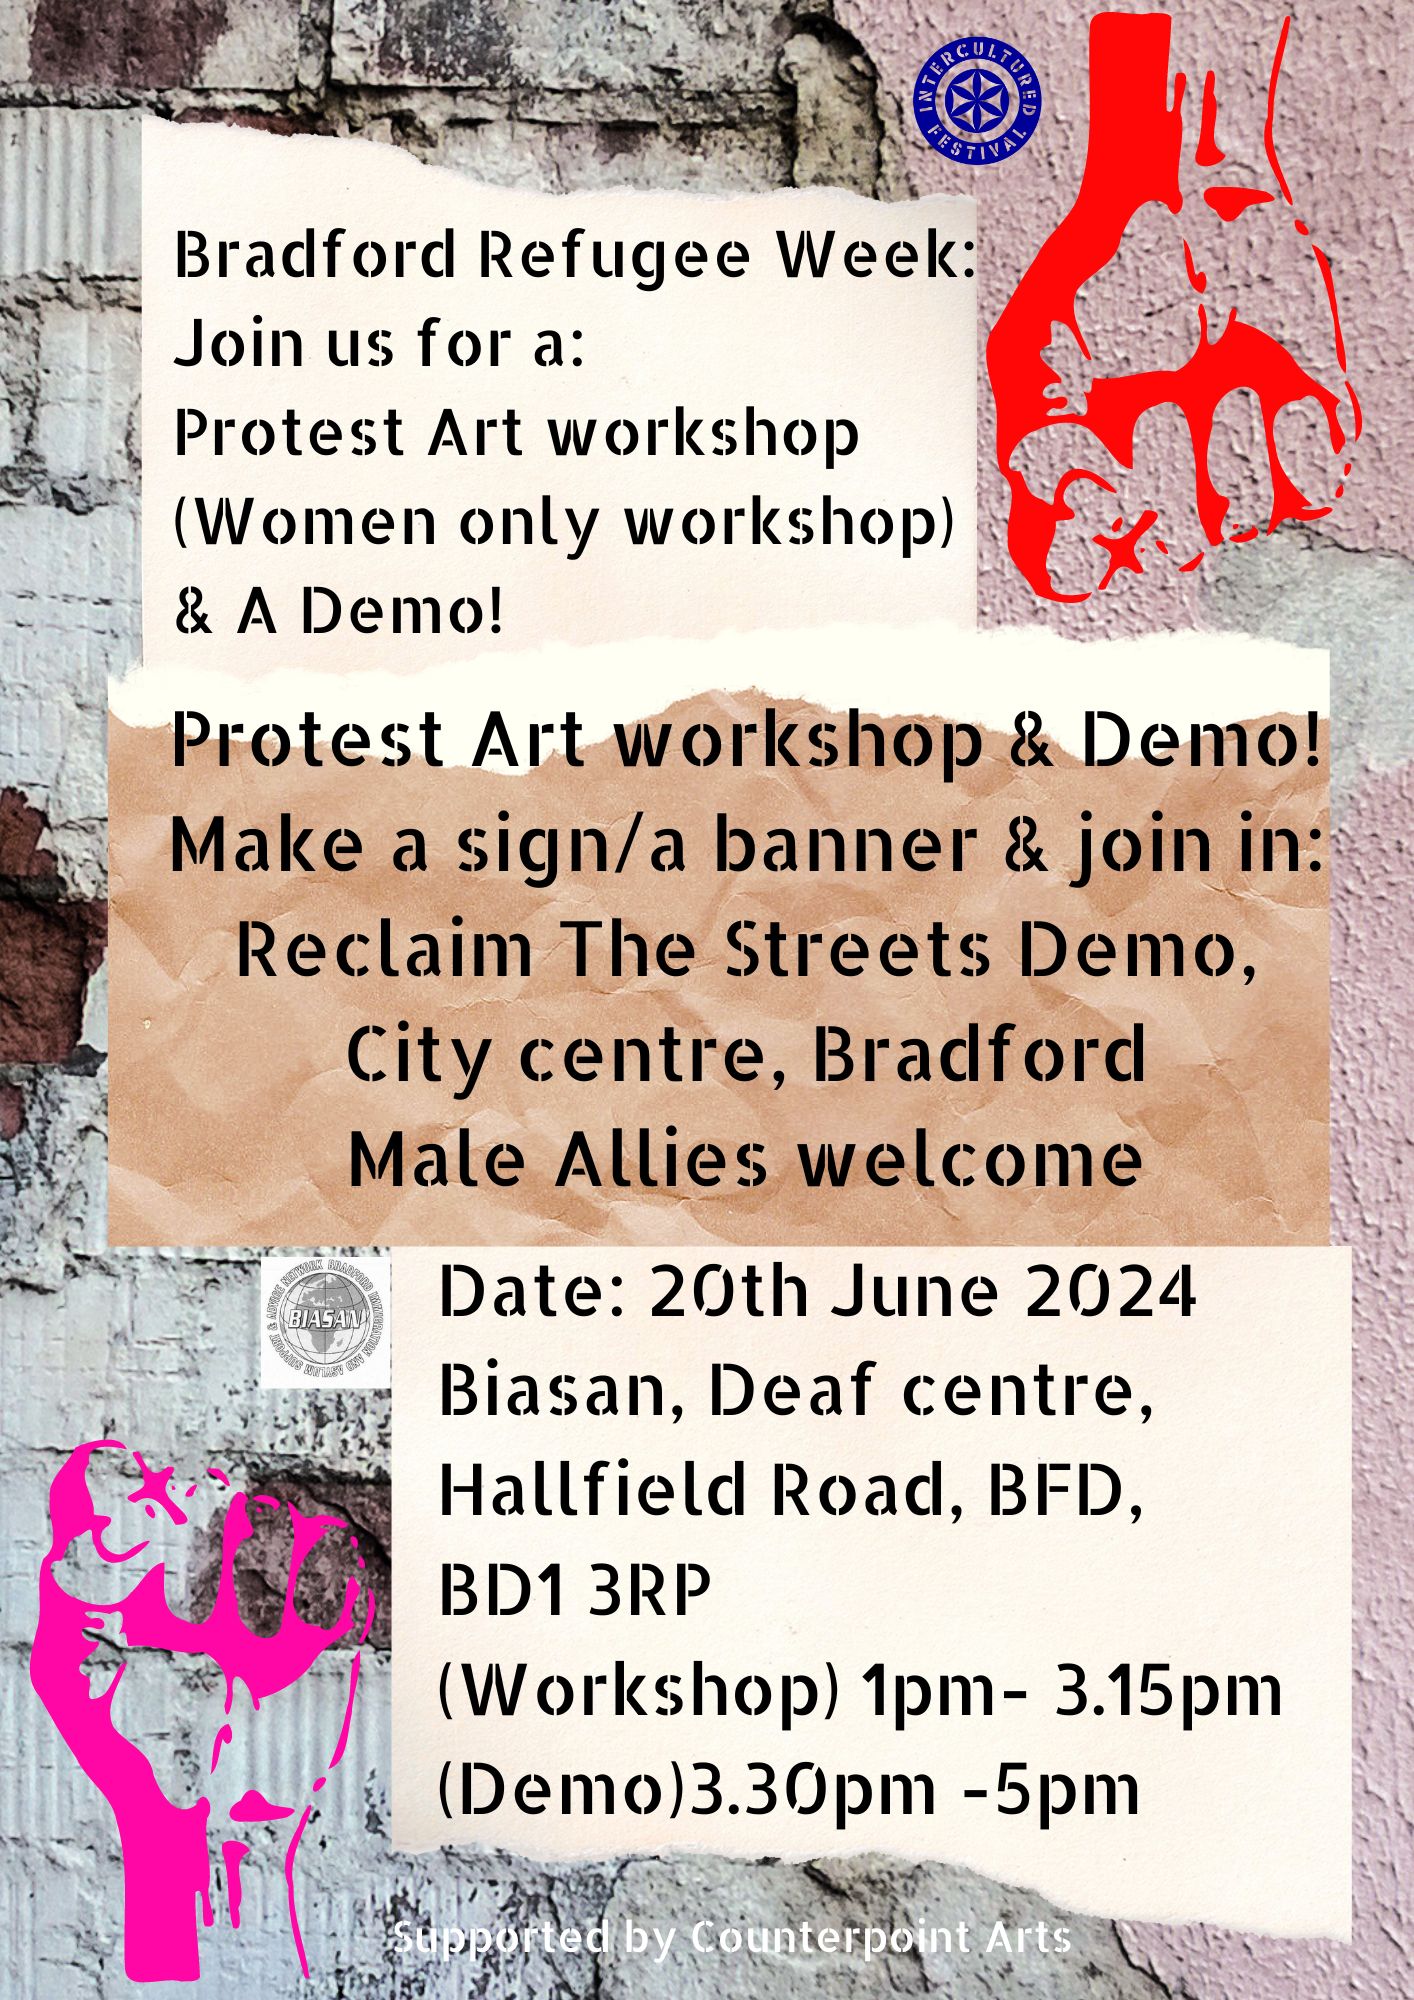 Protest Art workshop and Reclaim the Streets Demo